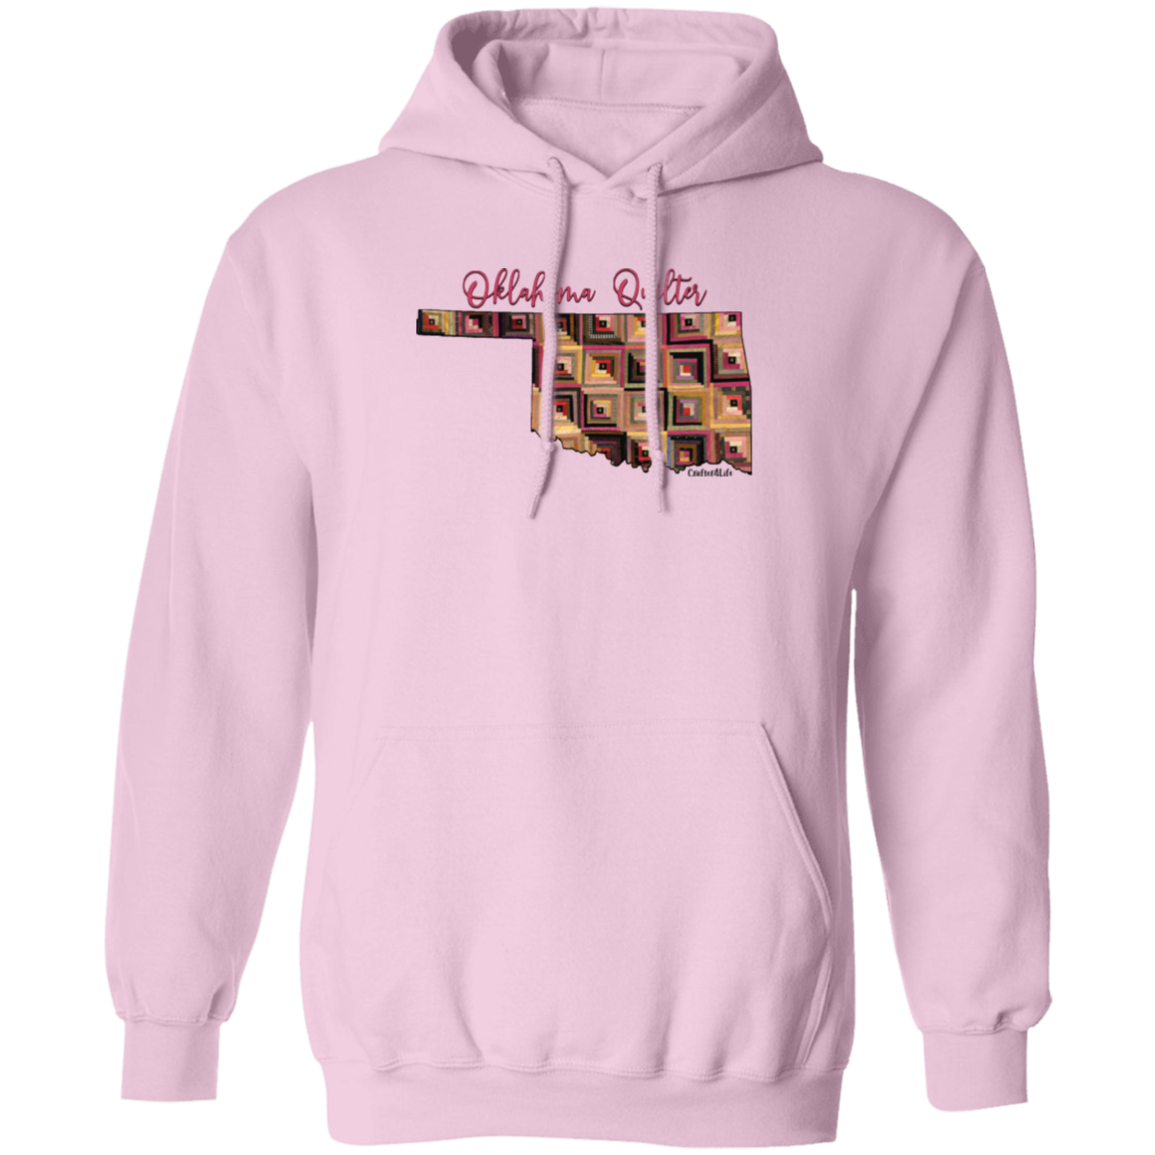 Oklahoma Quilter Pullover Hoodie, Gift for Quilting Friends and Family